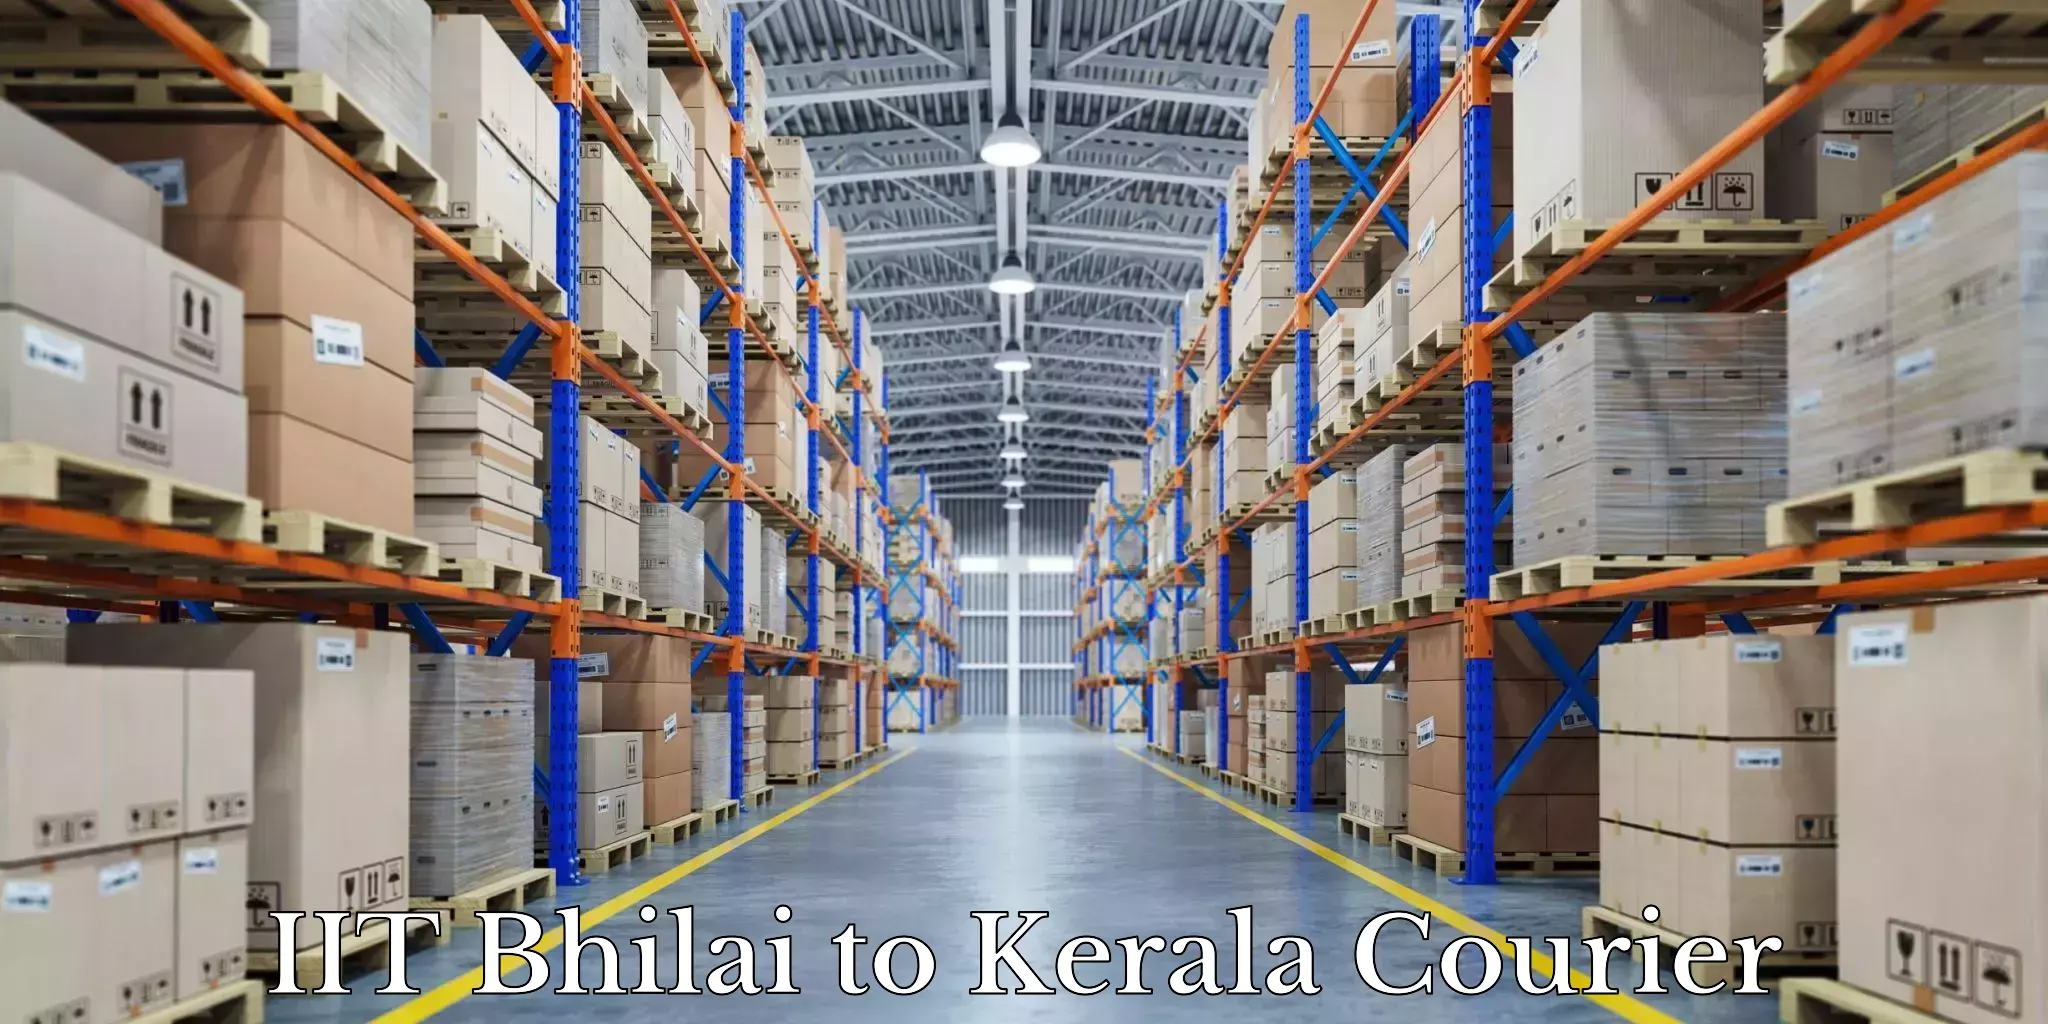 Quality relocation assistance in IIT Bhilai to Kerala